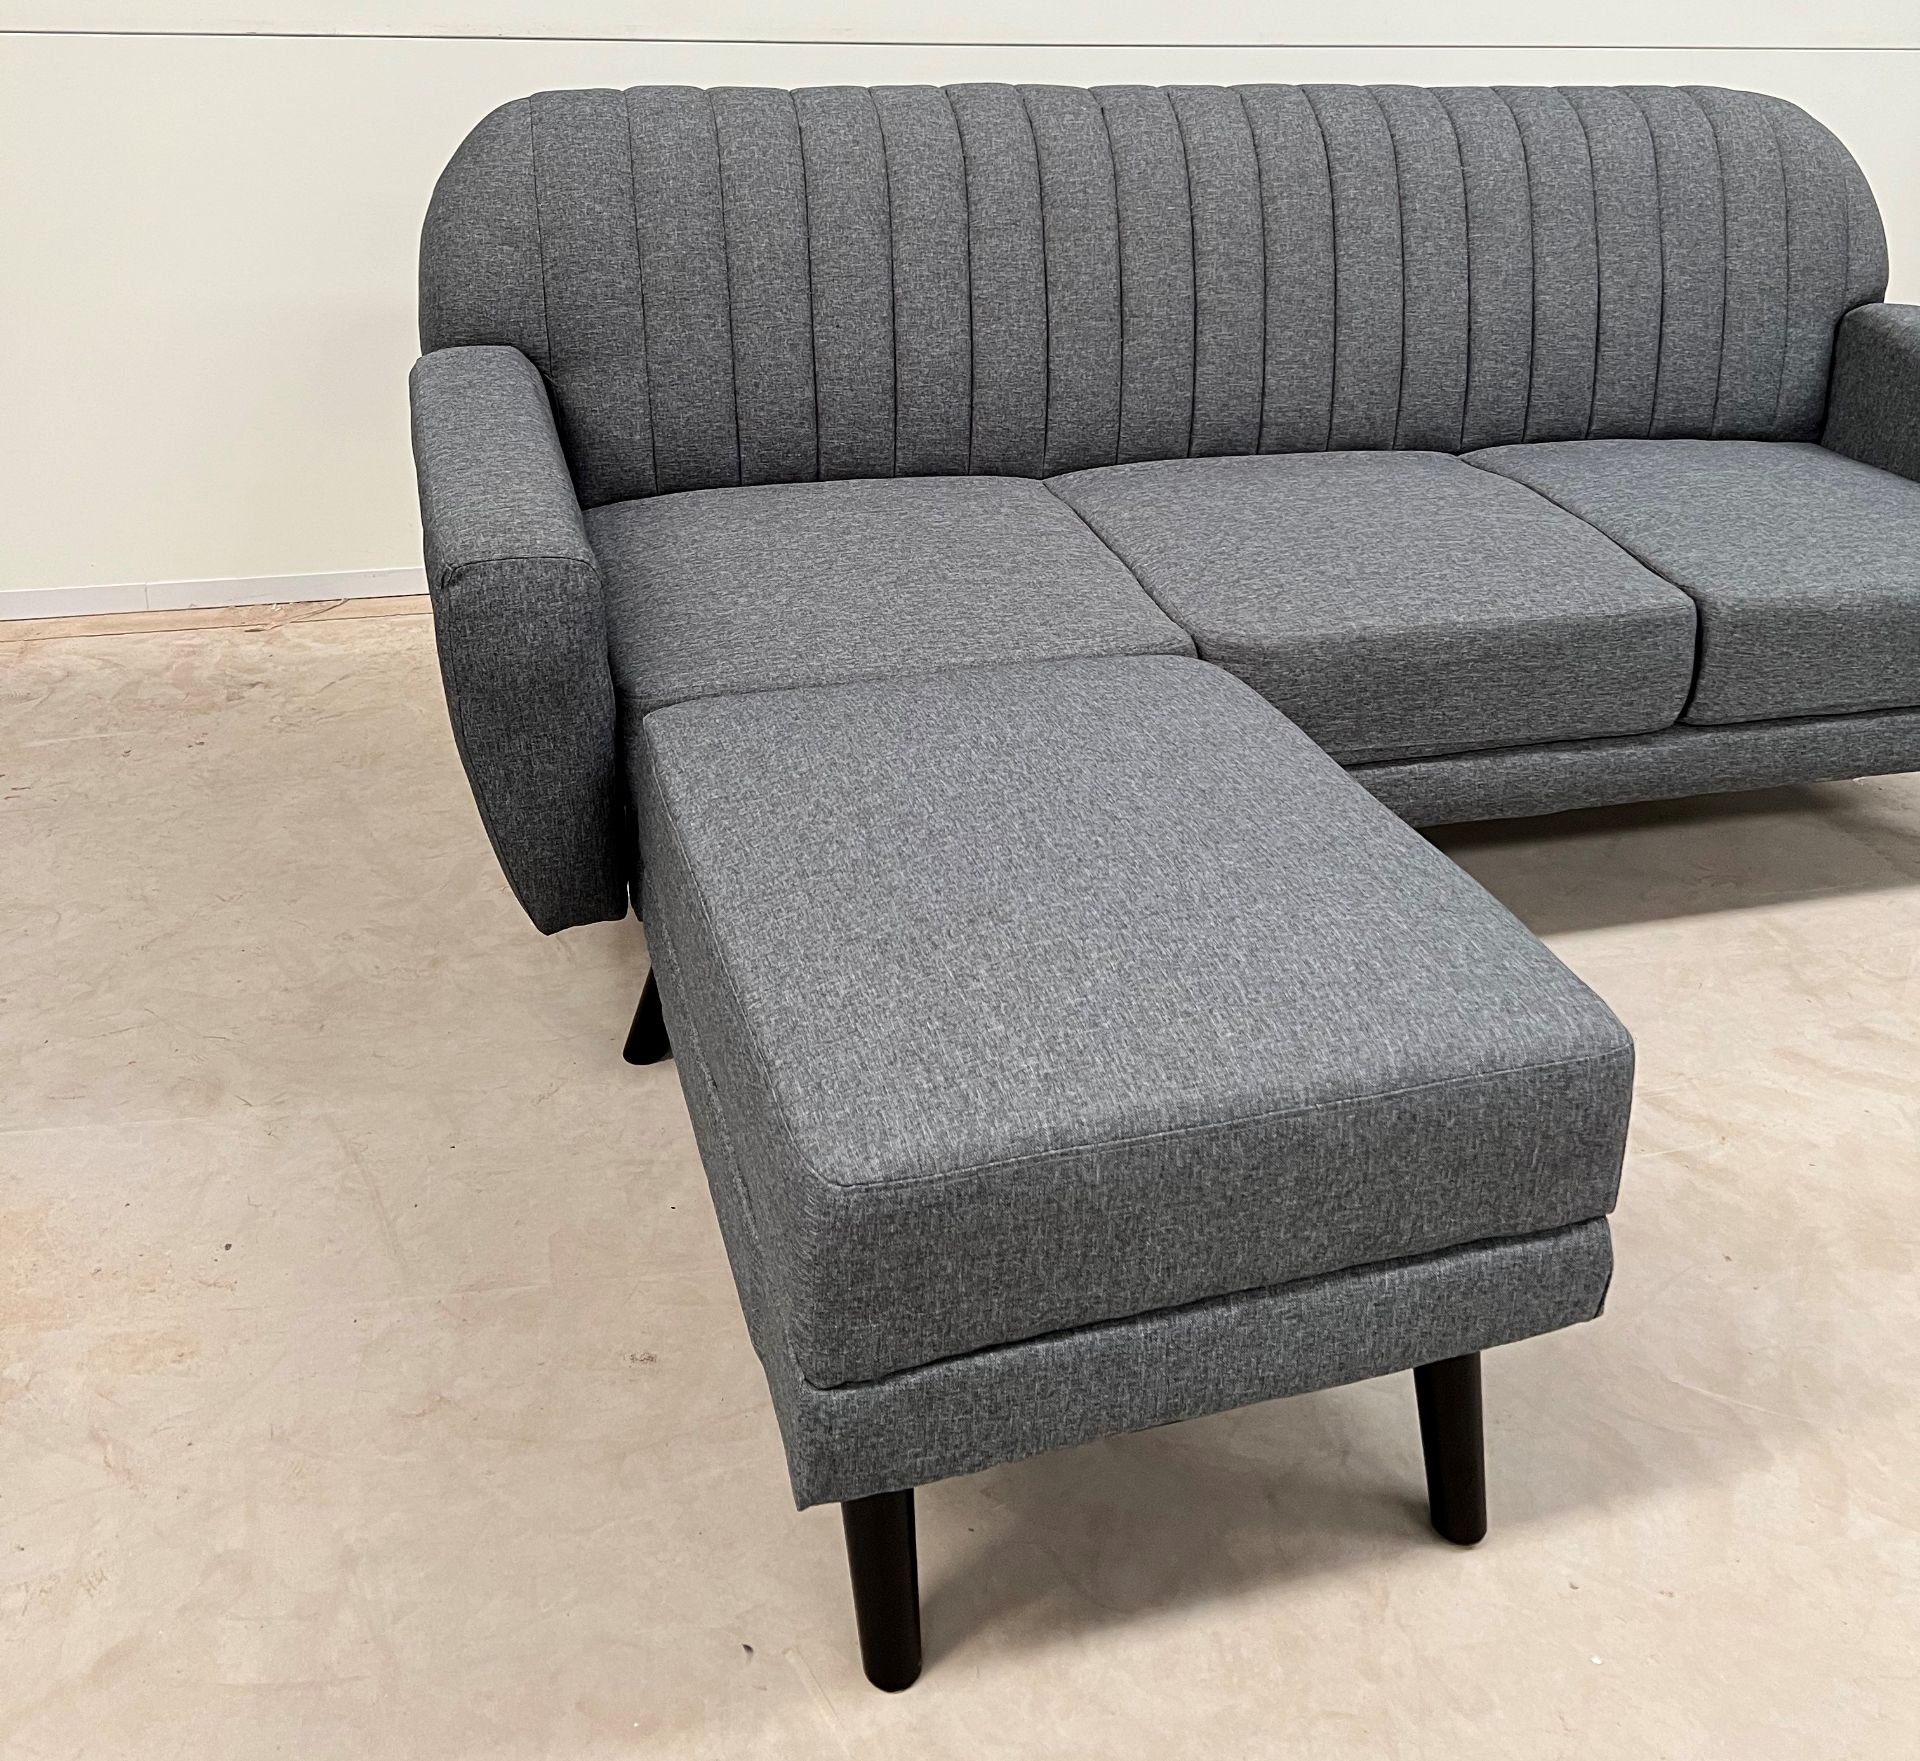 Lucia Reversible Sofa Bed in Grey Linen Retro-inspired and minimalist in shape, the Lucia collection - Image 2 of 3